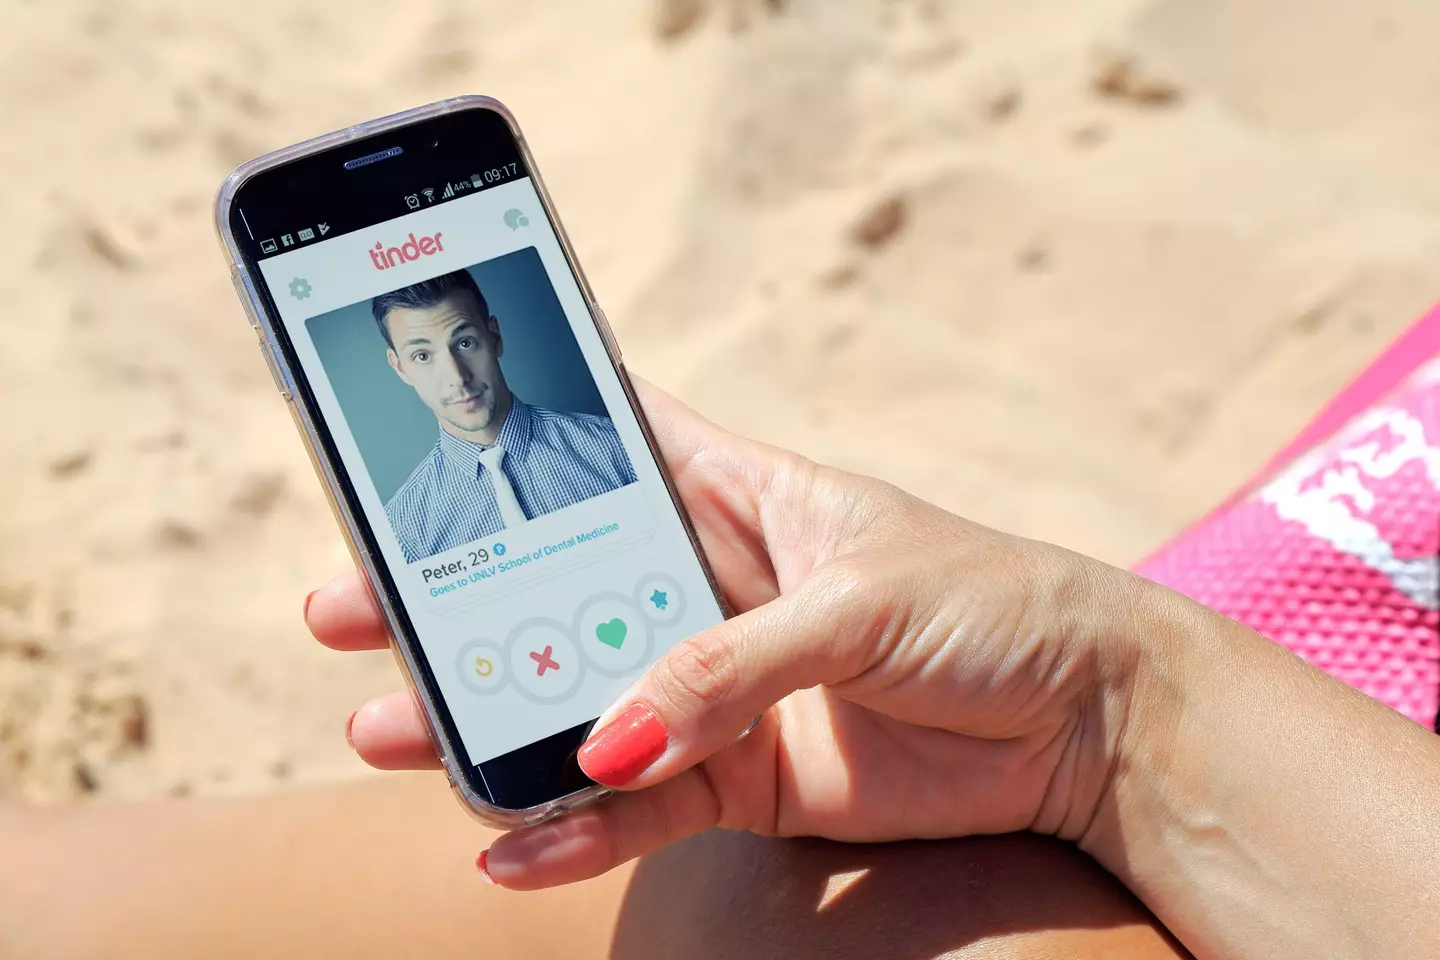 The Tinder CEO has revealed her top tip for finding love.